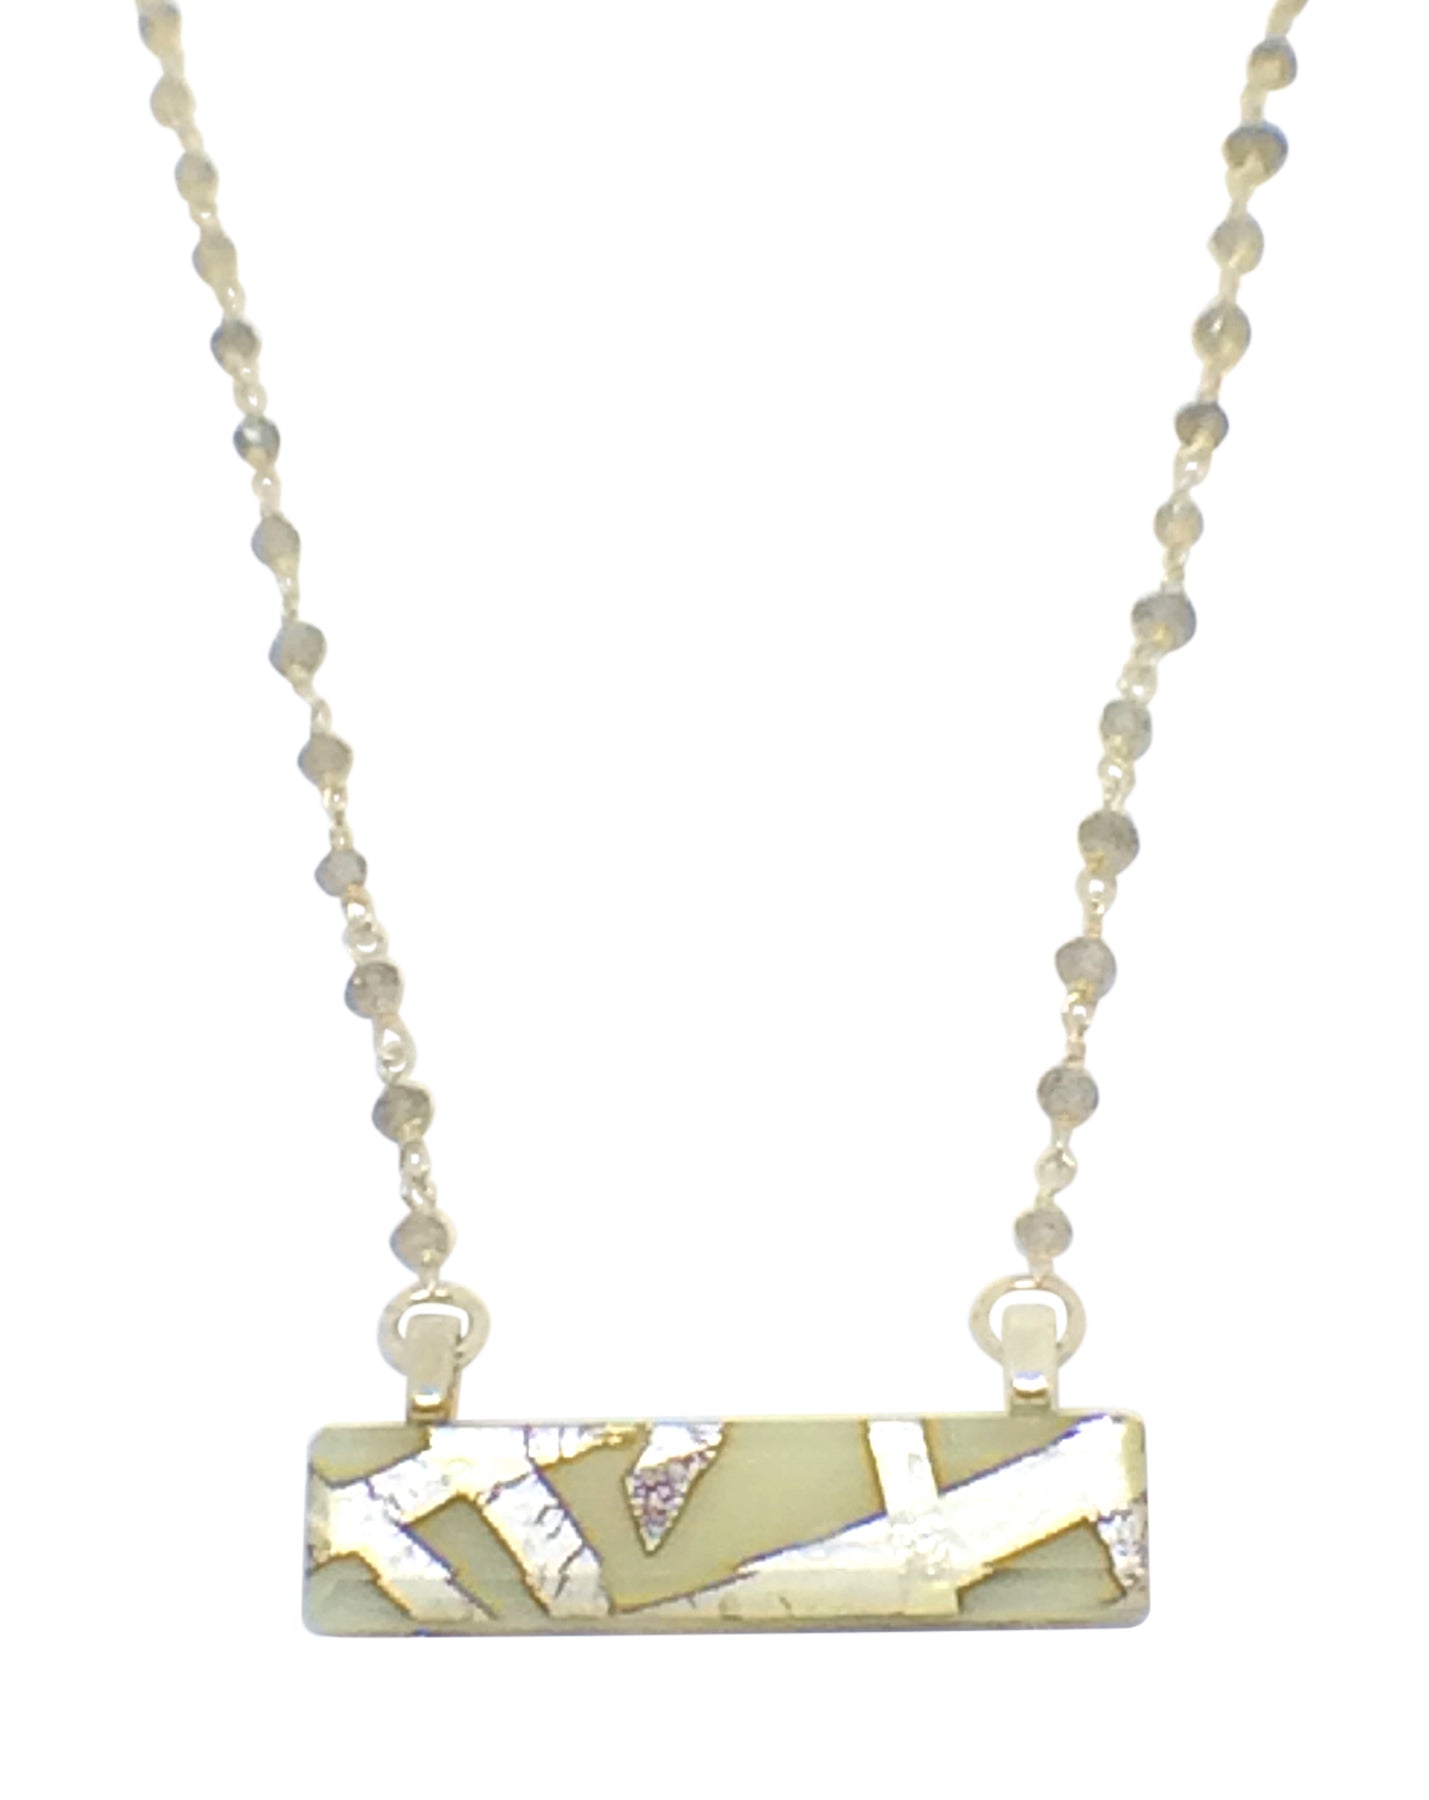 Cream Bar Necklace with Labradorite Gem Stone & Sterling Silver Chain